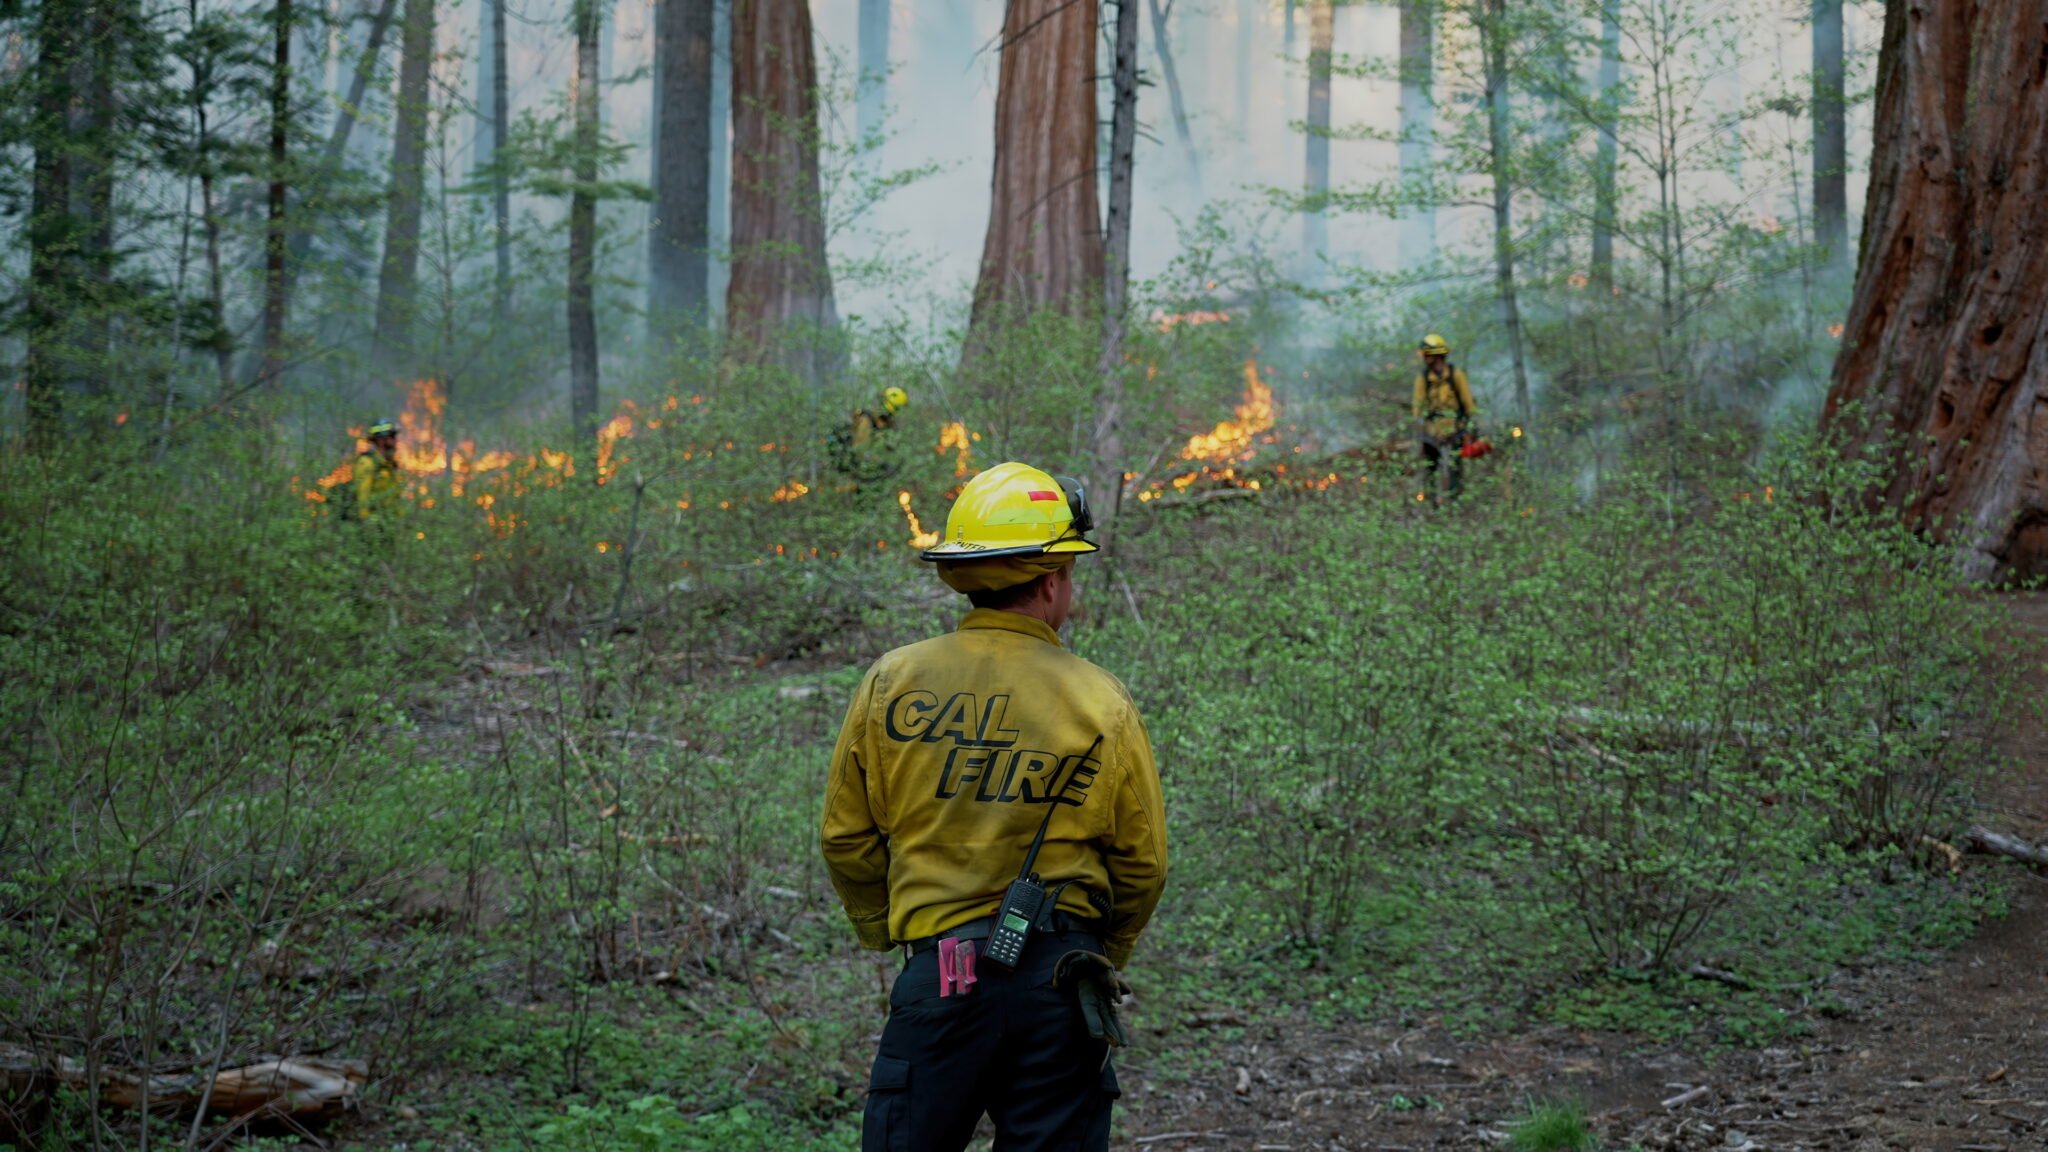 Prescribed burning in Calaveras Big Trees State Park in May 2022. Photo by Smith Robinson Multimedia, courtesy of Save the Redwoods League